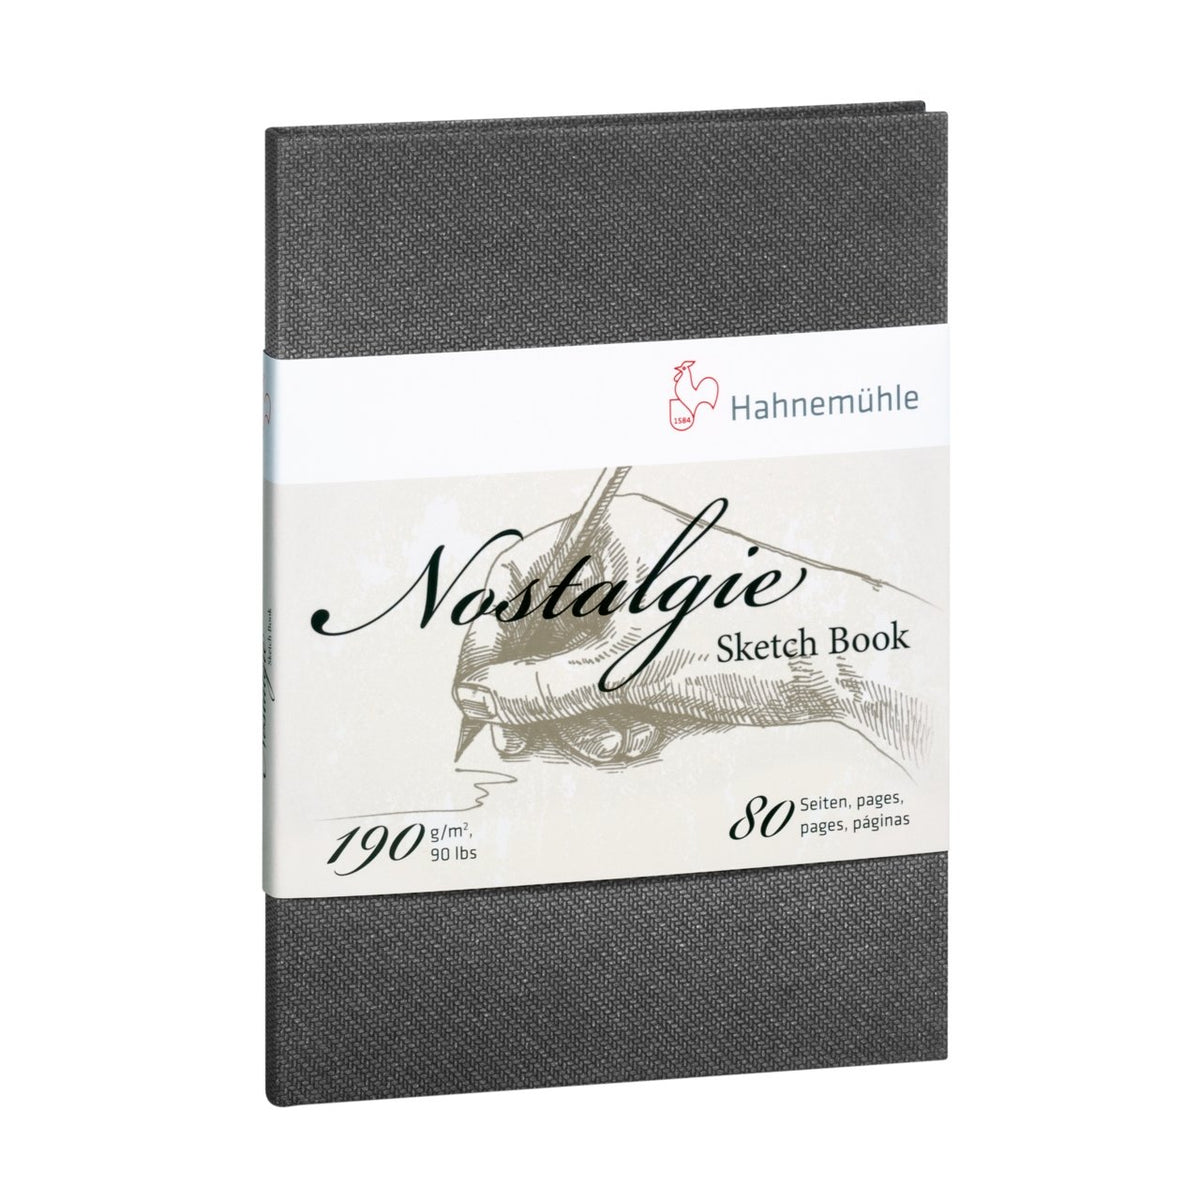 Hahnemuehle Nostalgie Hard Cover Sketch Book 11.6 inch x 8.2 inch (A4) Portrait - merriartist.com